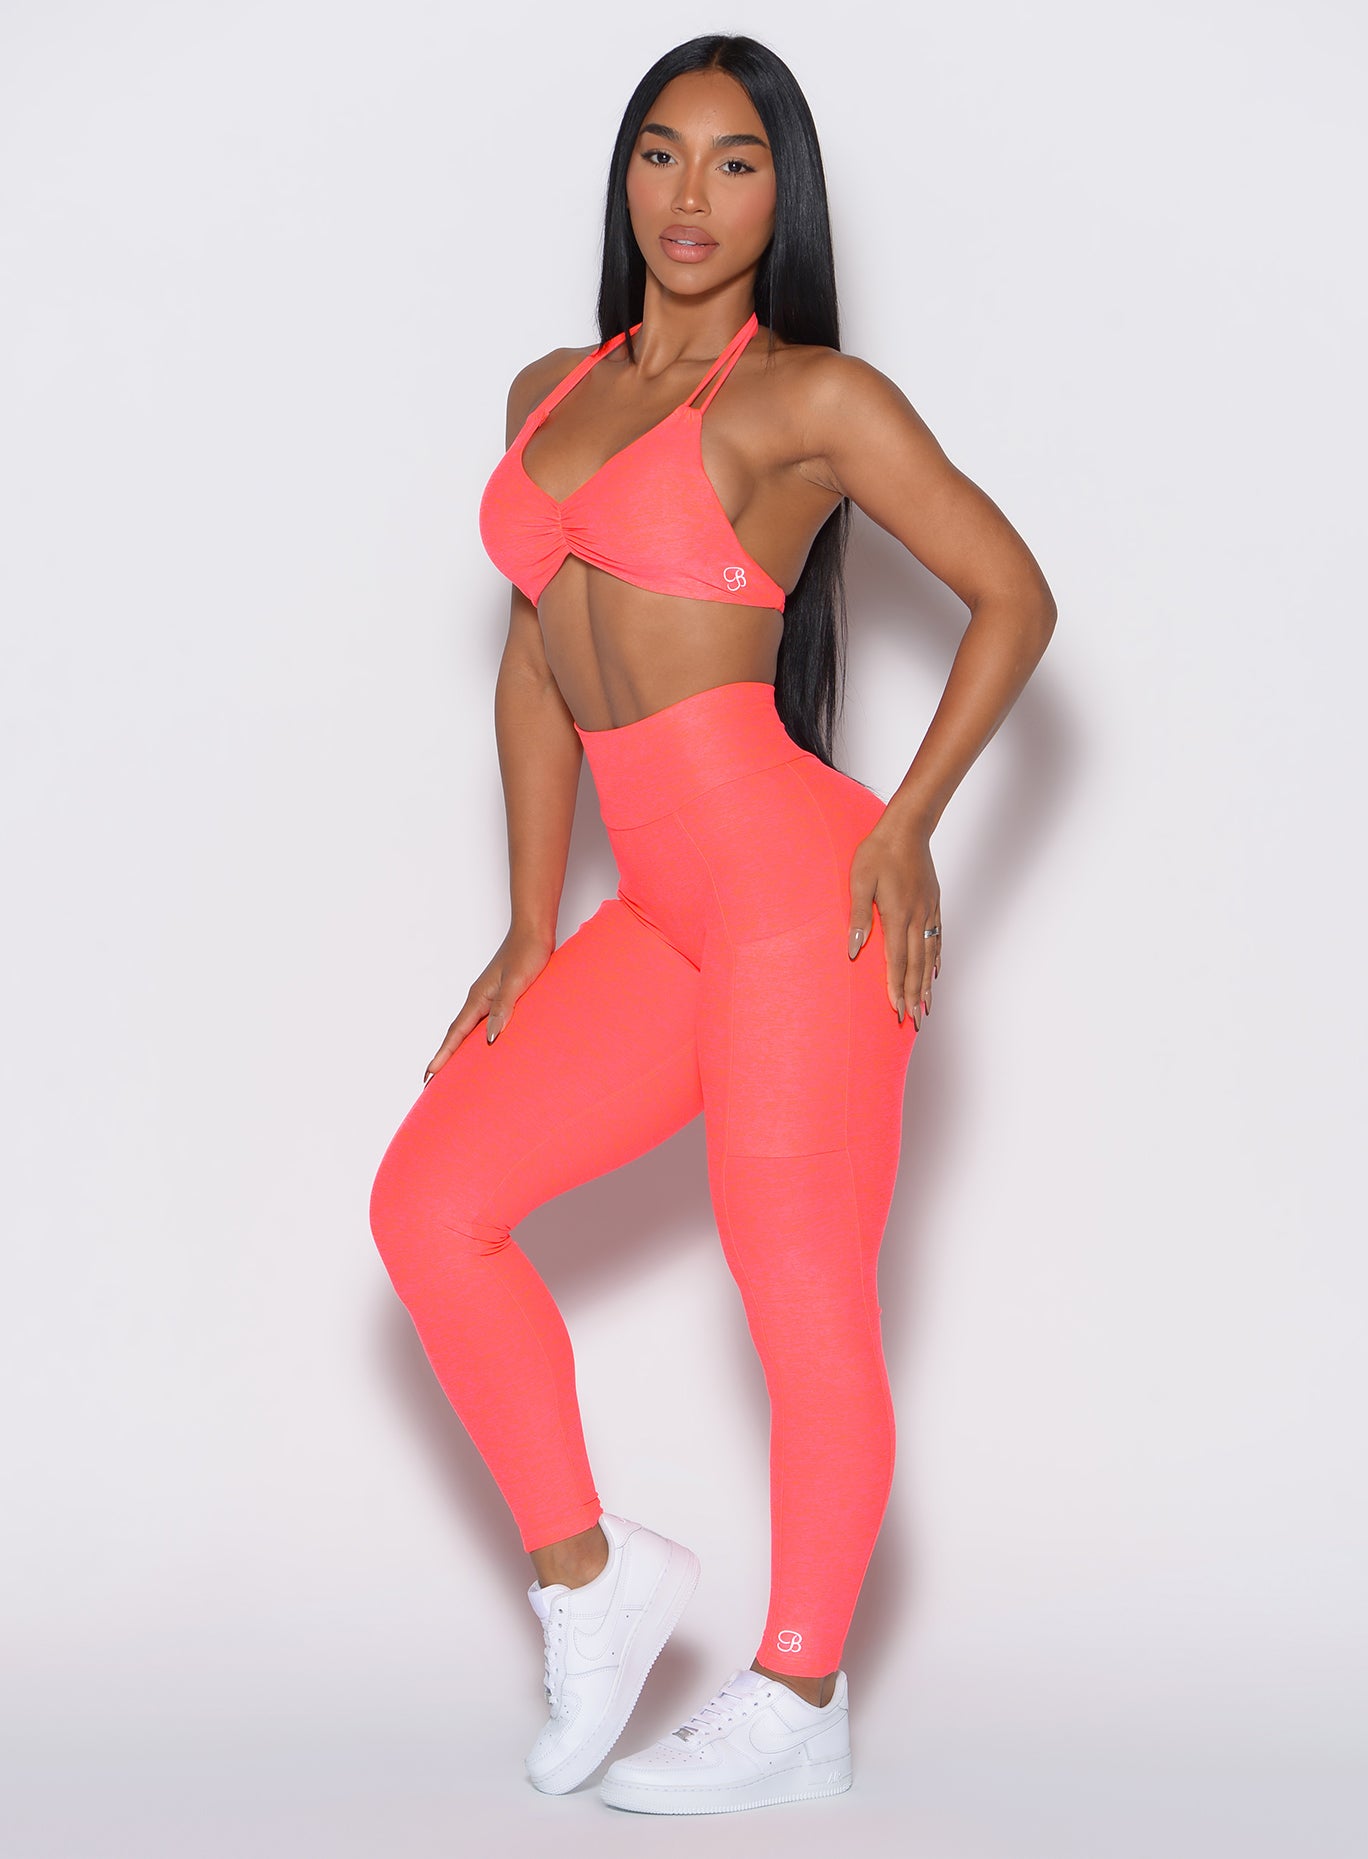 front profile view of a model angled slightly to her right wearing our curves leggings in Neon Apricot Pink color along with the matching sports bra